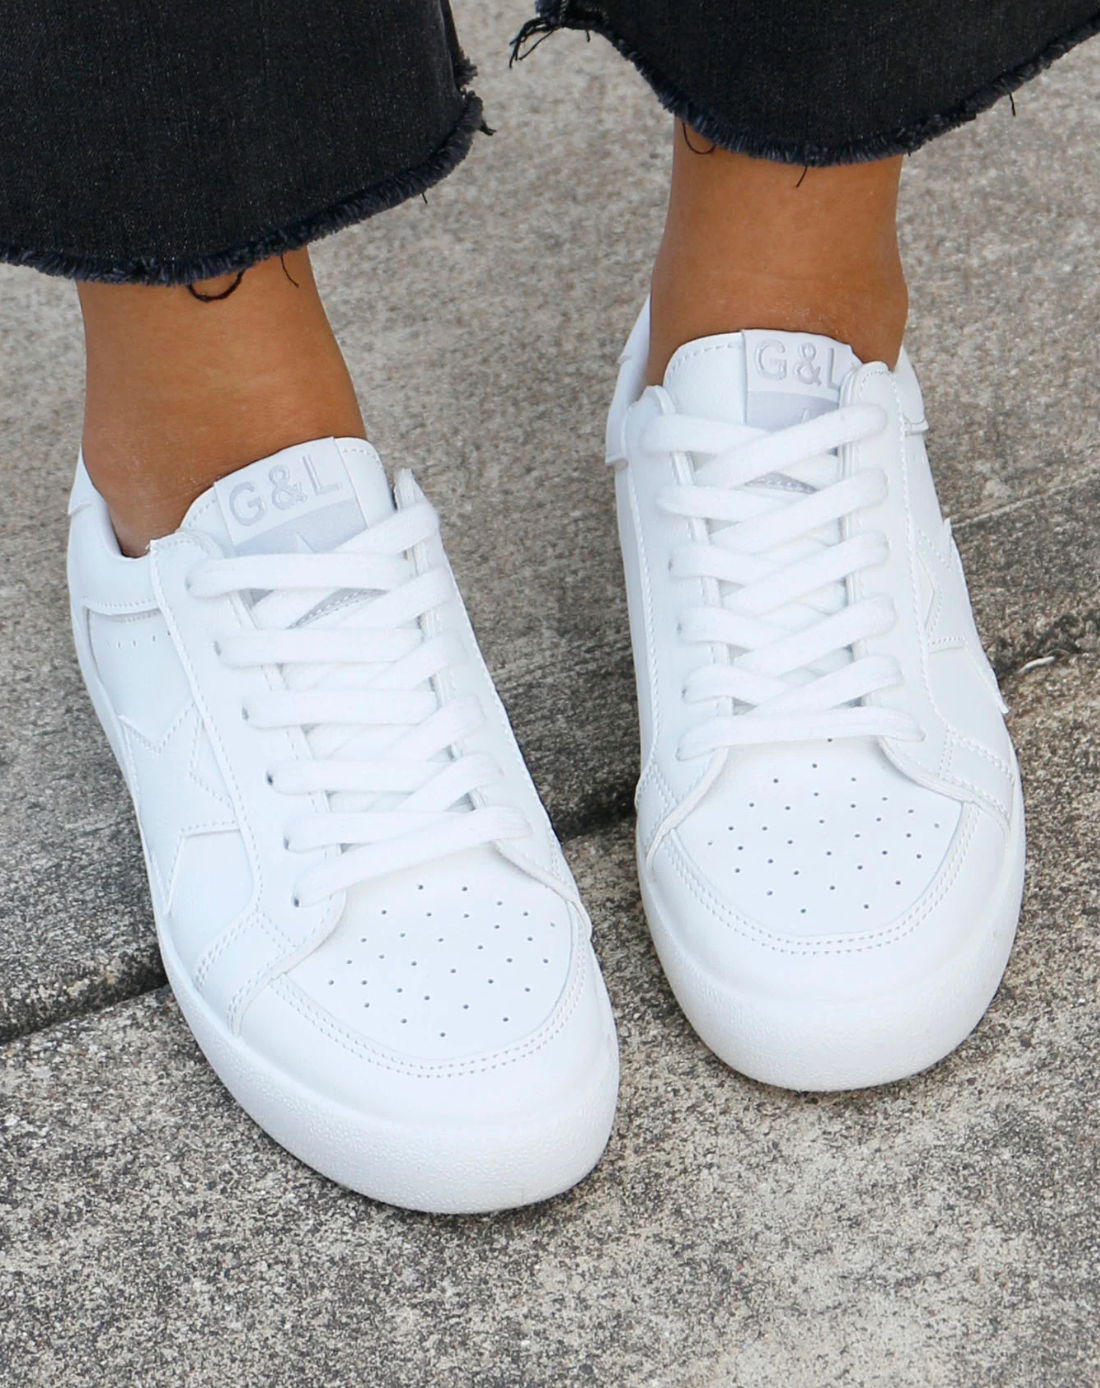 Grace & Lace Star Sneakers - White